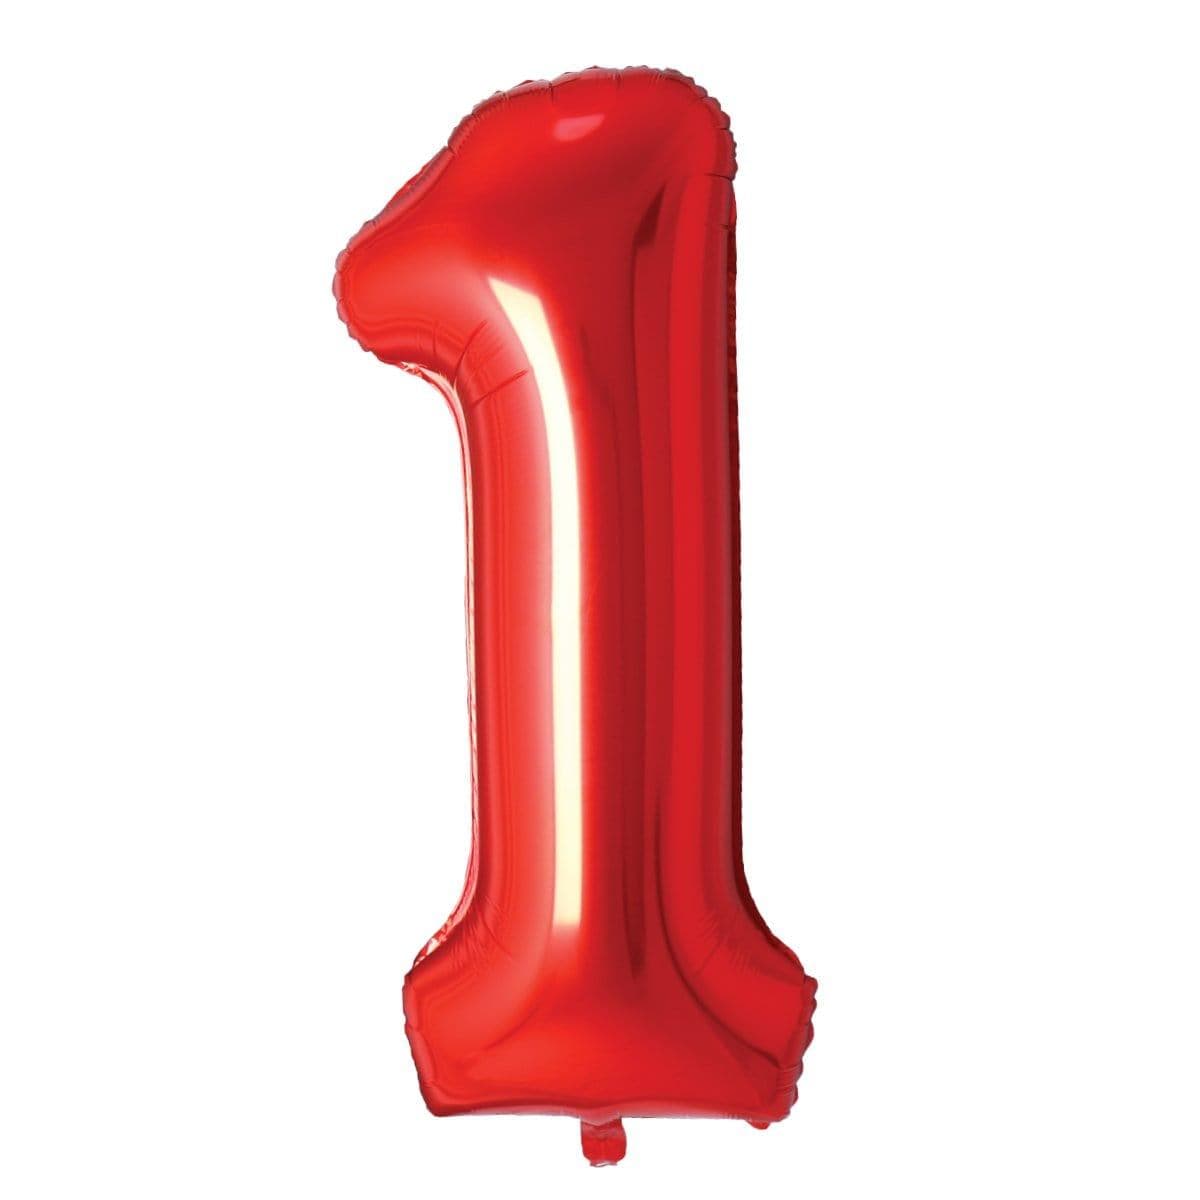 Buy Balloons Red Number 1 Foil Balloon, 34 Inches sold at Party Expert